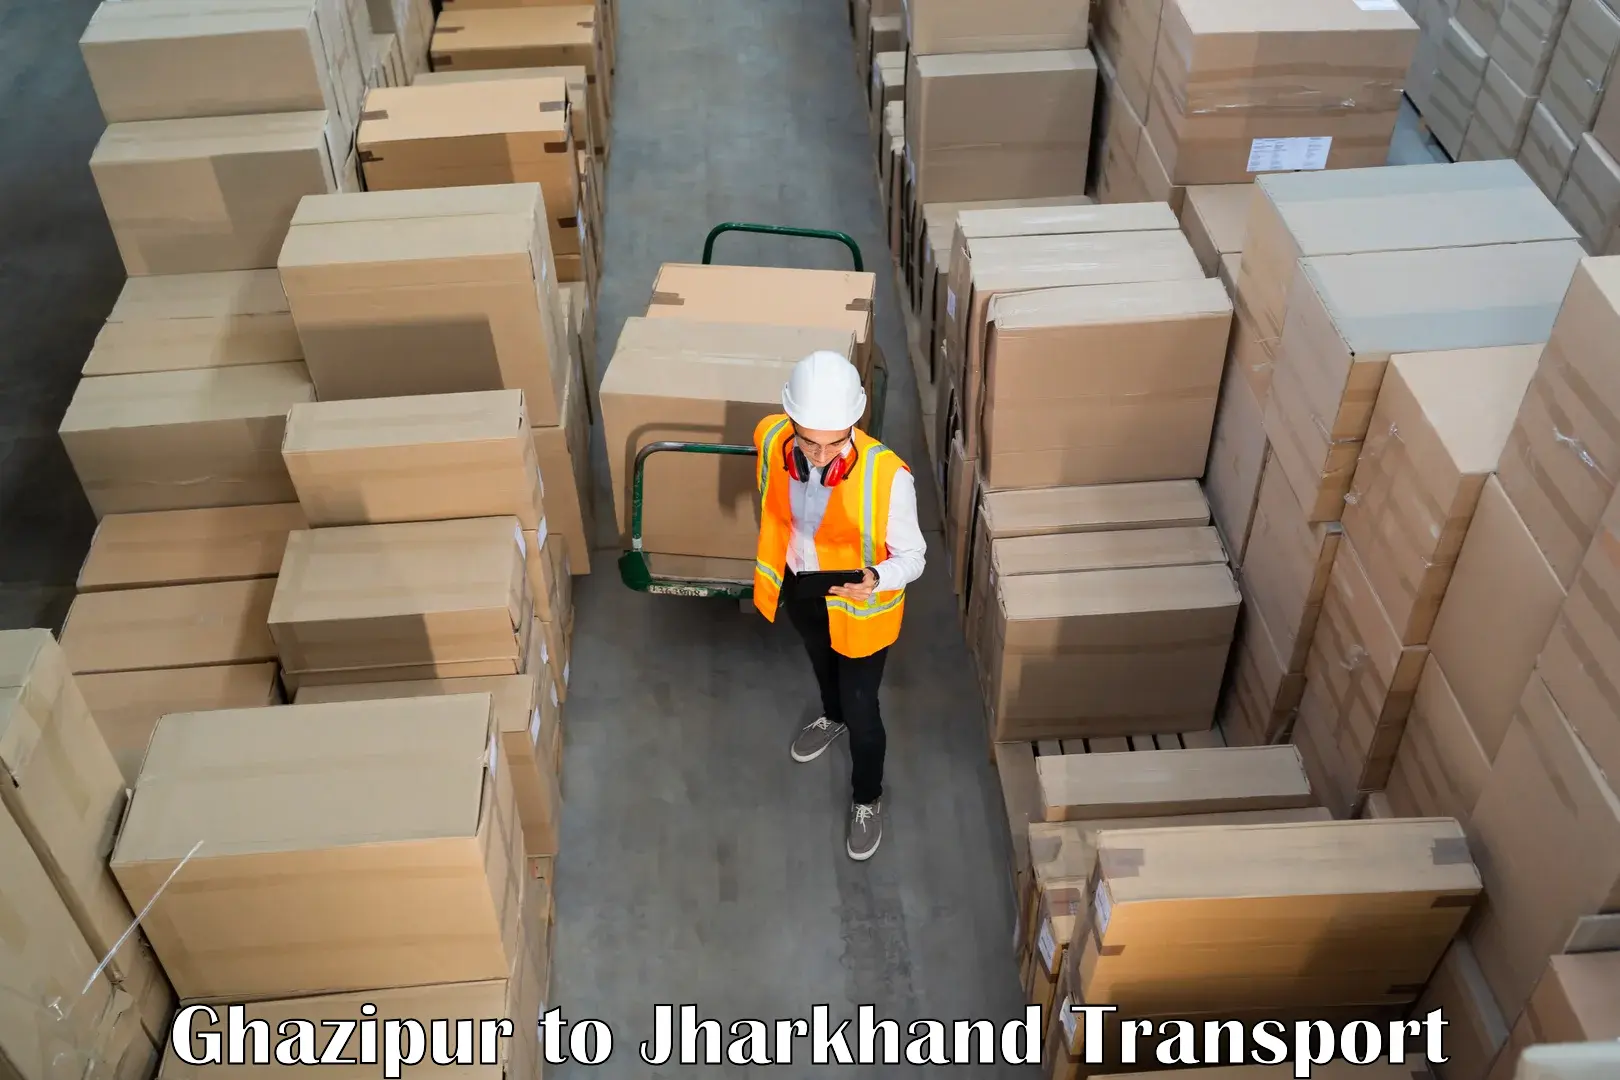 Commercial transport service Ghazipur to Hazaribagh